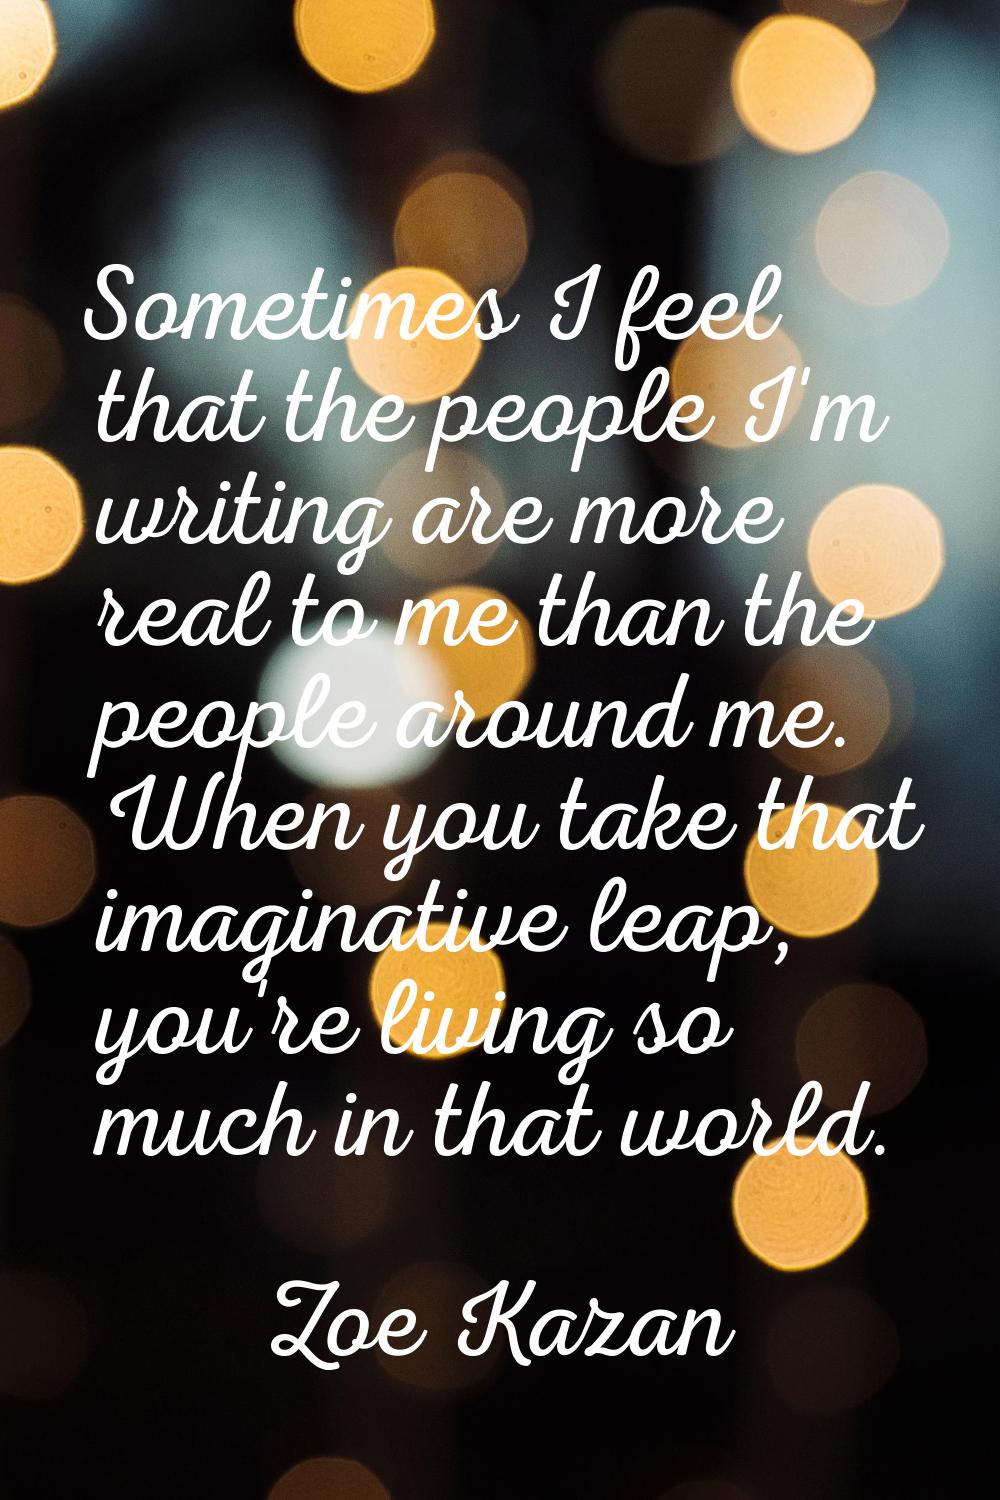 Sometimes I feel that the people I'm writing are more real to me than the people around me. When yo